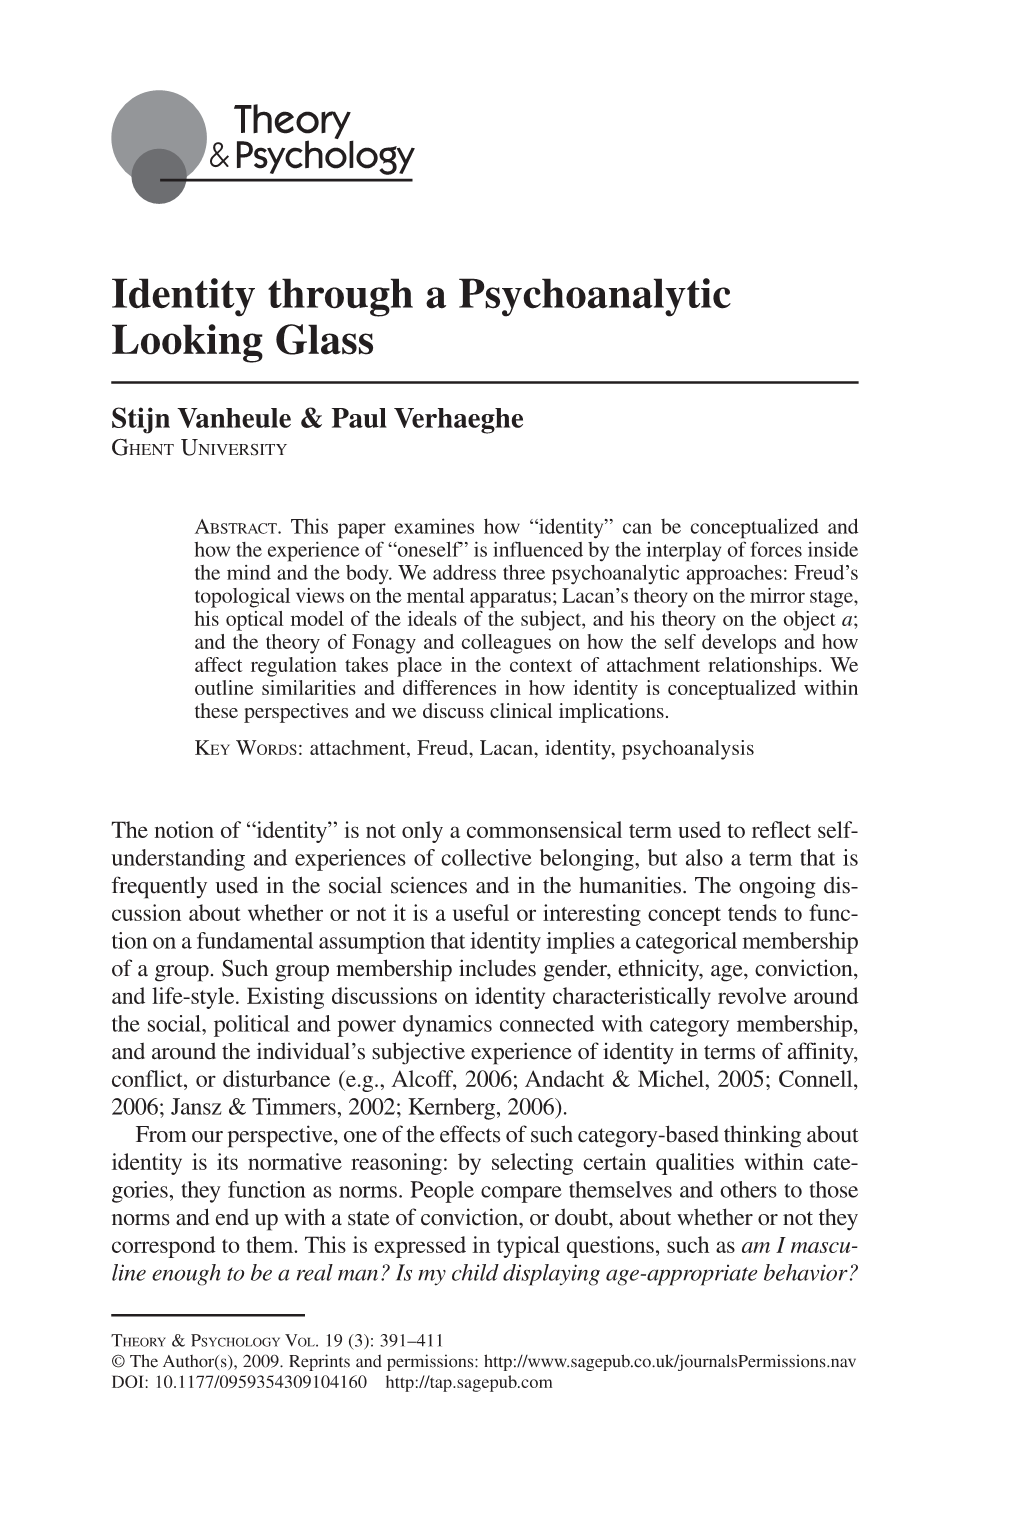 Identity Through a Psychoanalytic Looking Glass